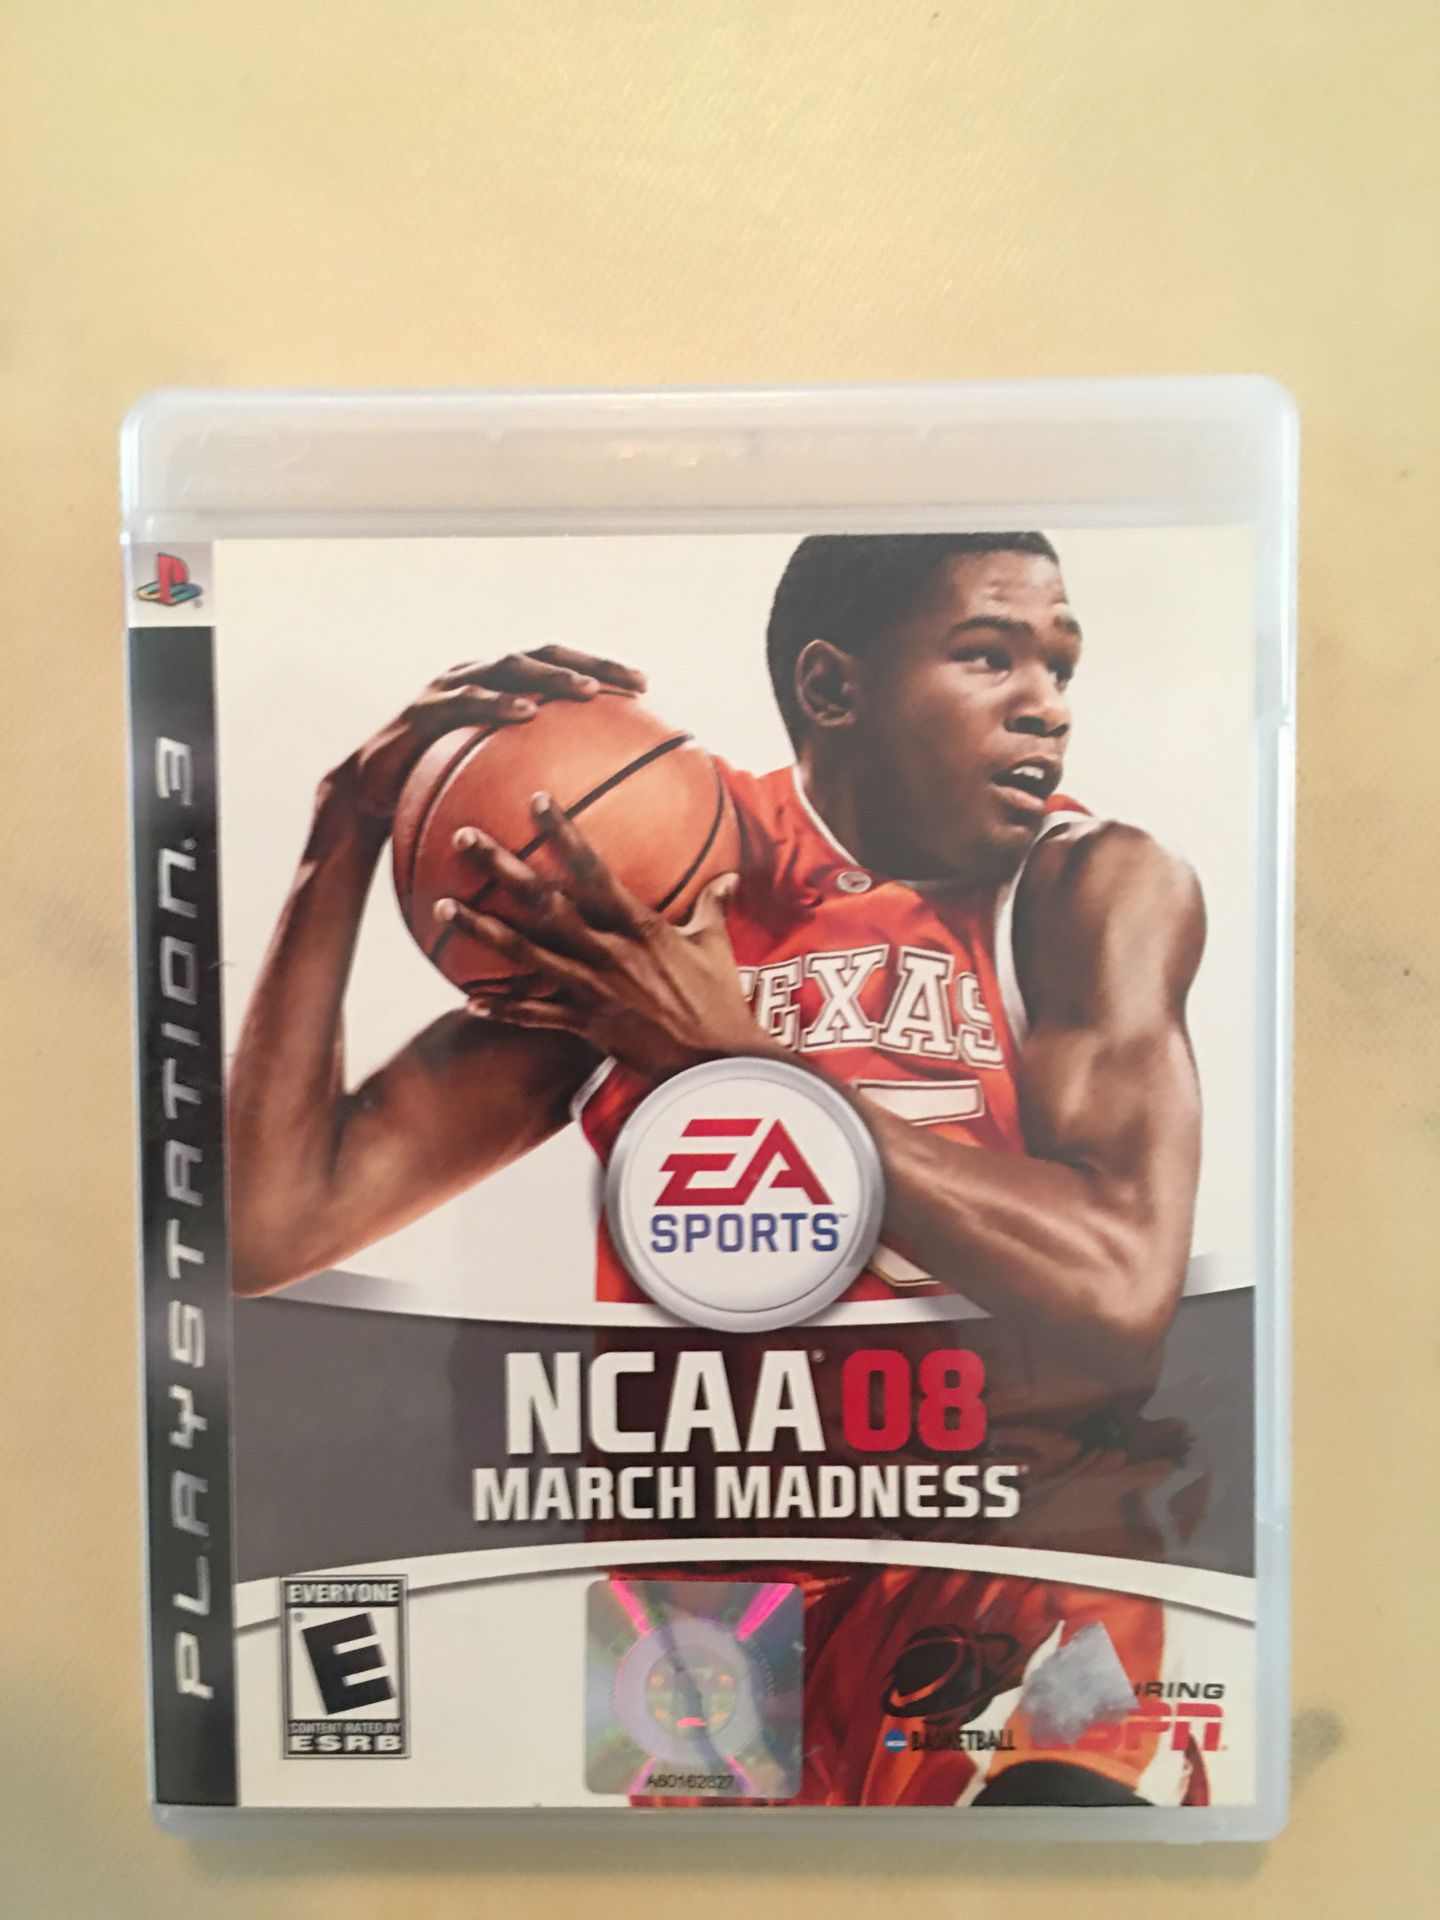 Sony PlayStation ps3 ncaa 08 March madness